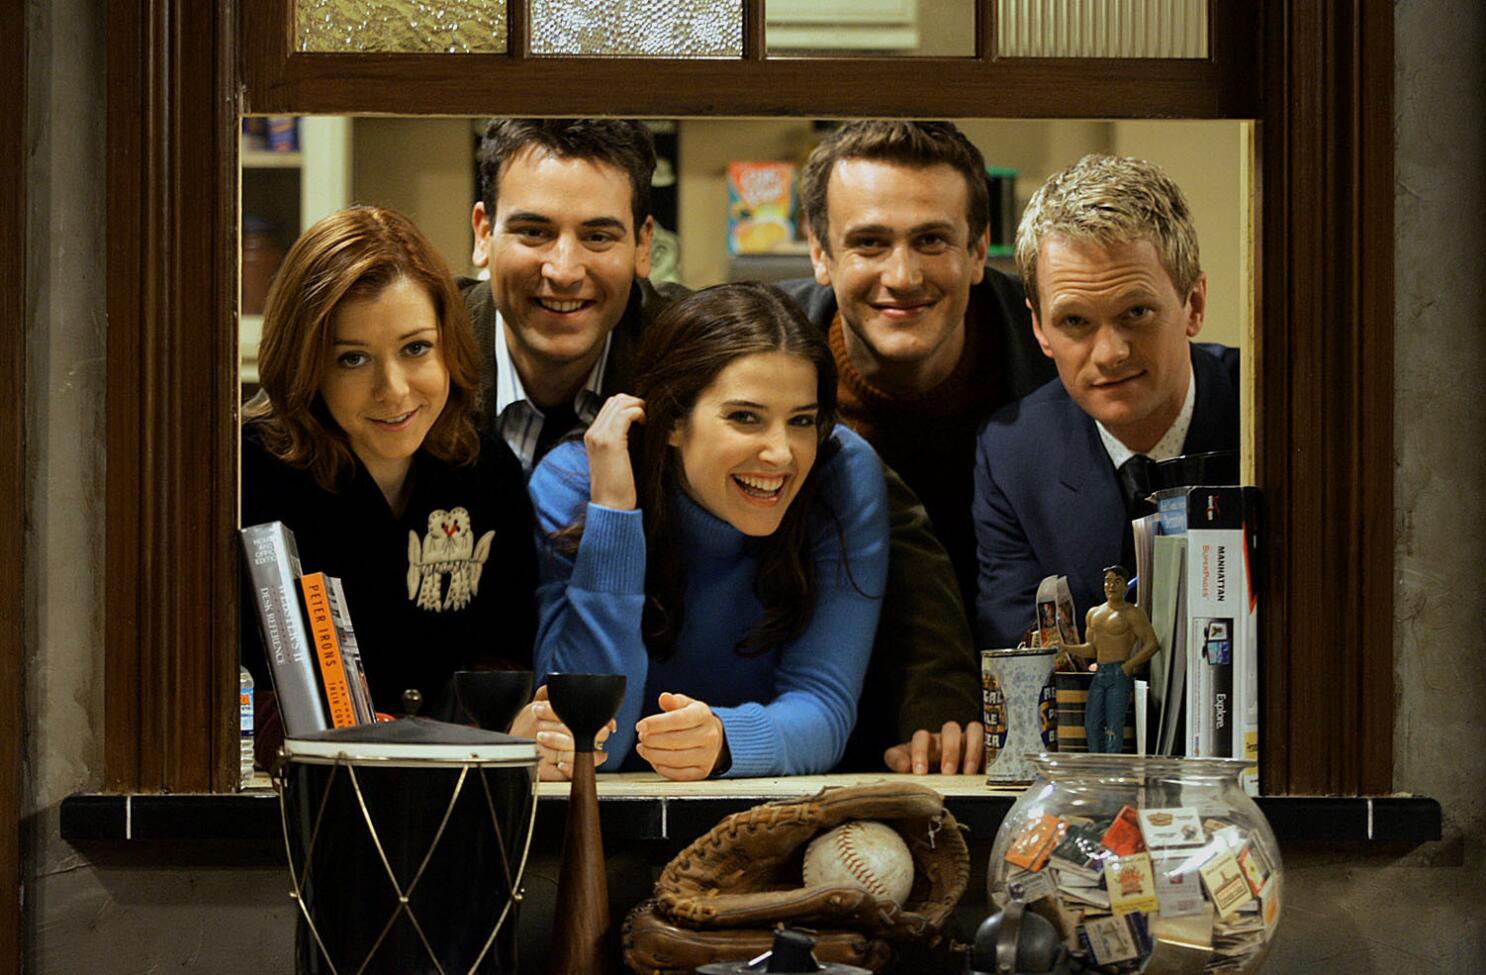 75 'How I Met Your Mother' Quotes from Ted, Barney, Robin